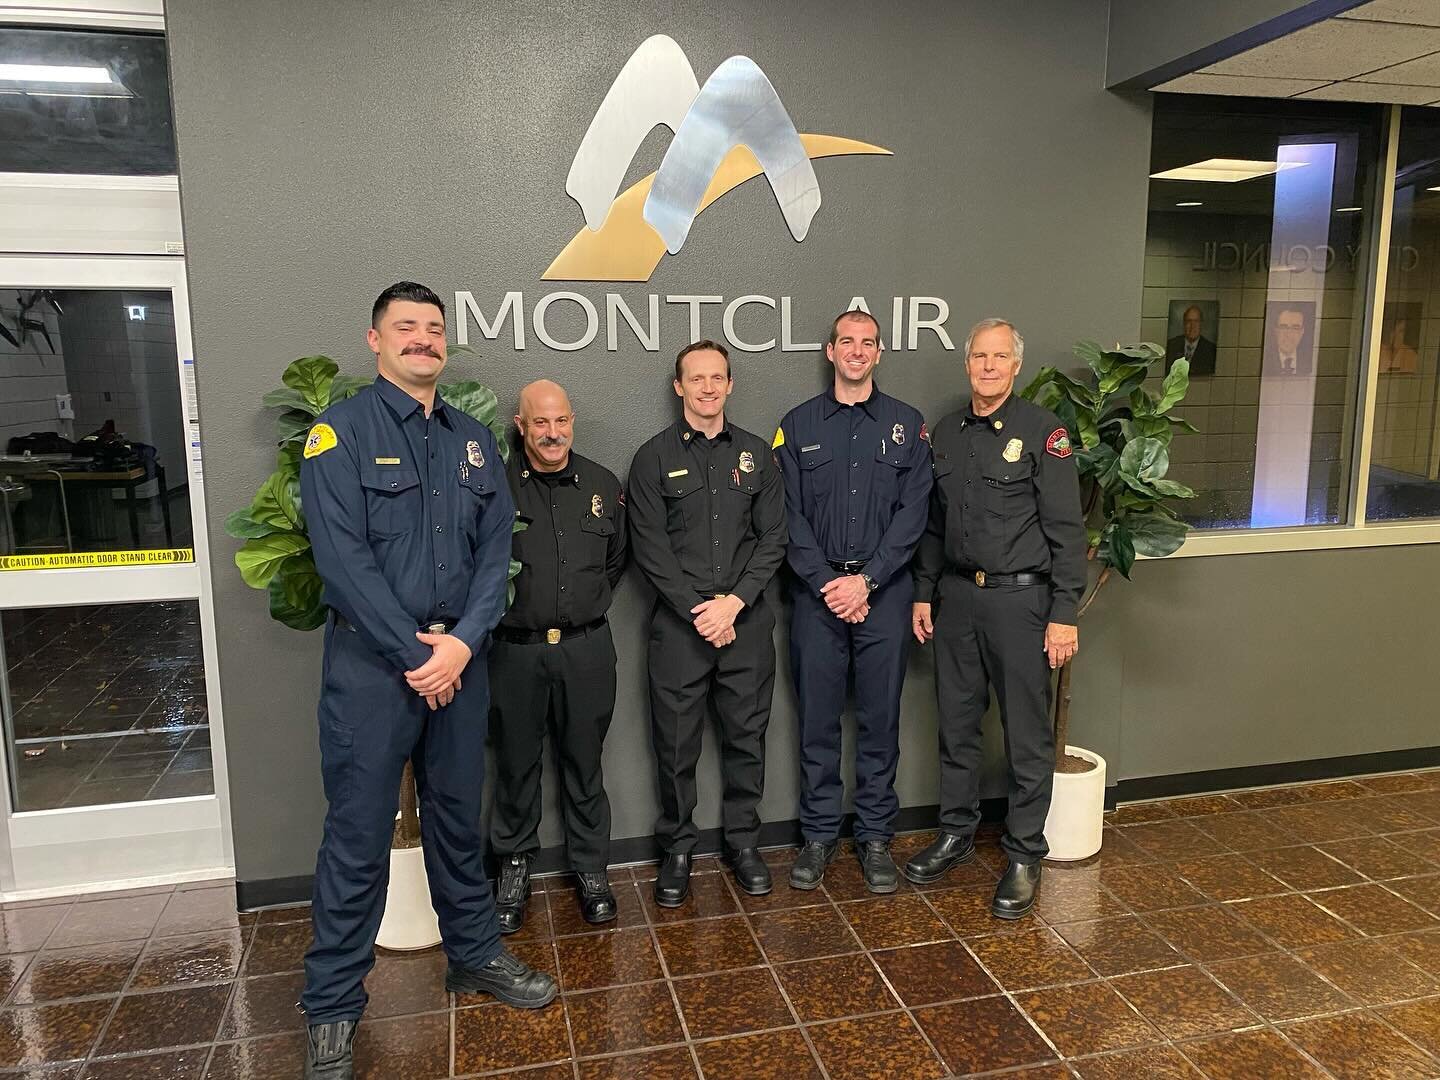 Please join us in congratulating Fire Engineer Metzo and Assistant Fire Chief Dierck on their recent promotions here at the Montclair Fire Department! Also help us welcome Firefighter/Paramedic Lucas Timm as our most recent new hire! We are incredibl